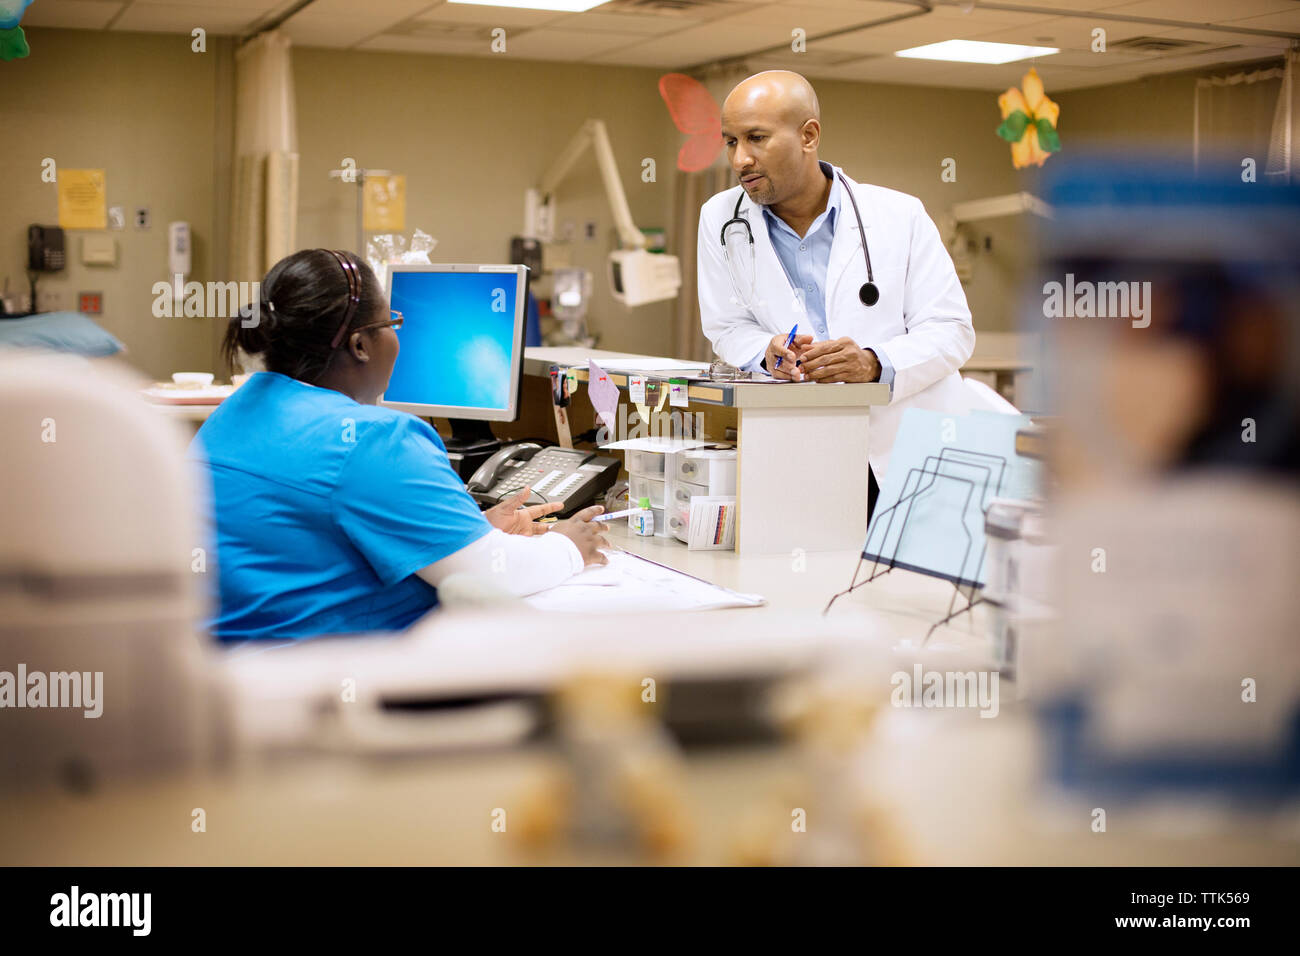 Doctor talking to nurse in hospital Stock Photo